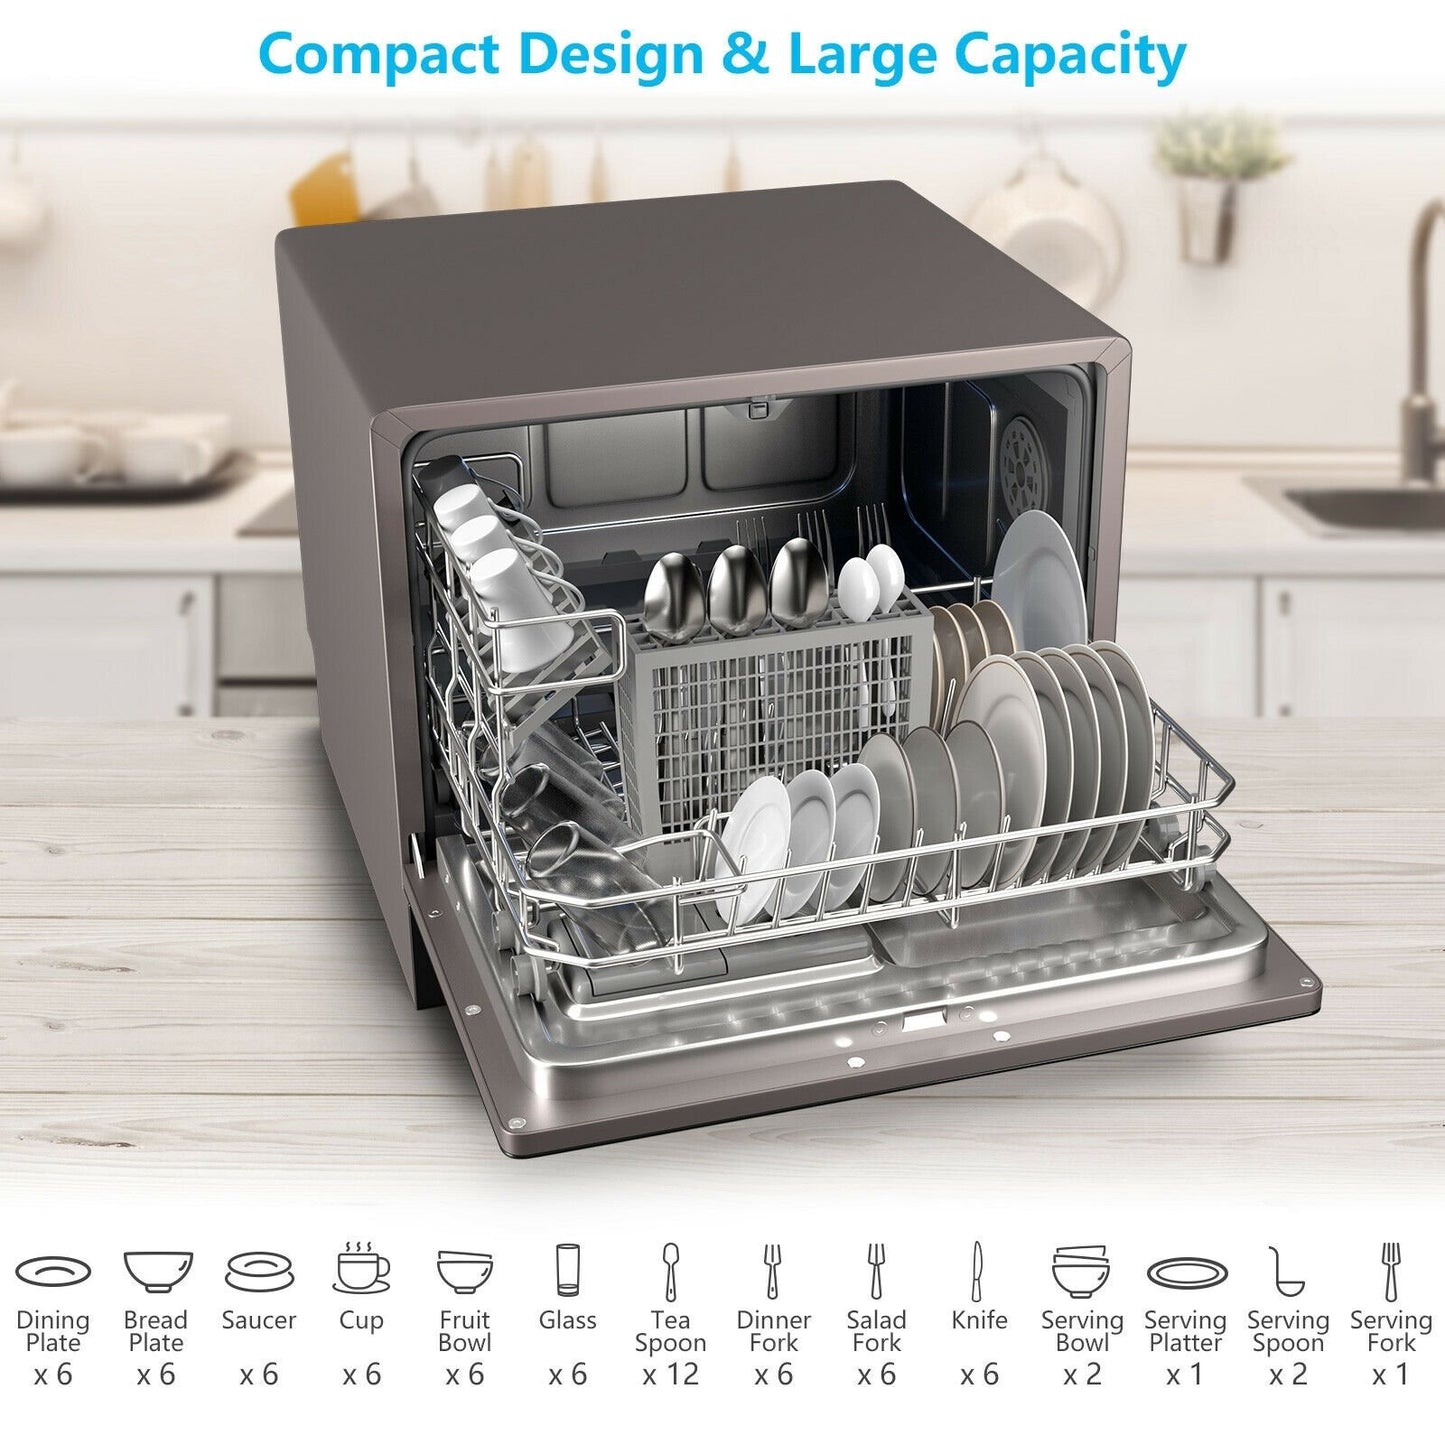 6 Place Setting Built-in or Countertop Dishwasher Machine with 5 Programs, Black